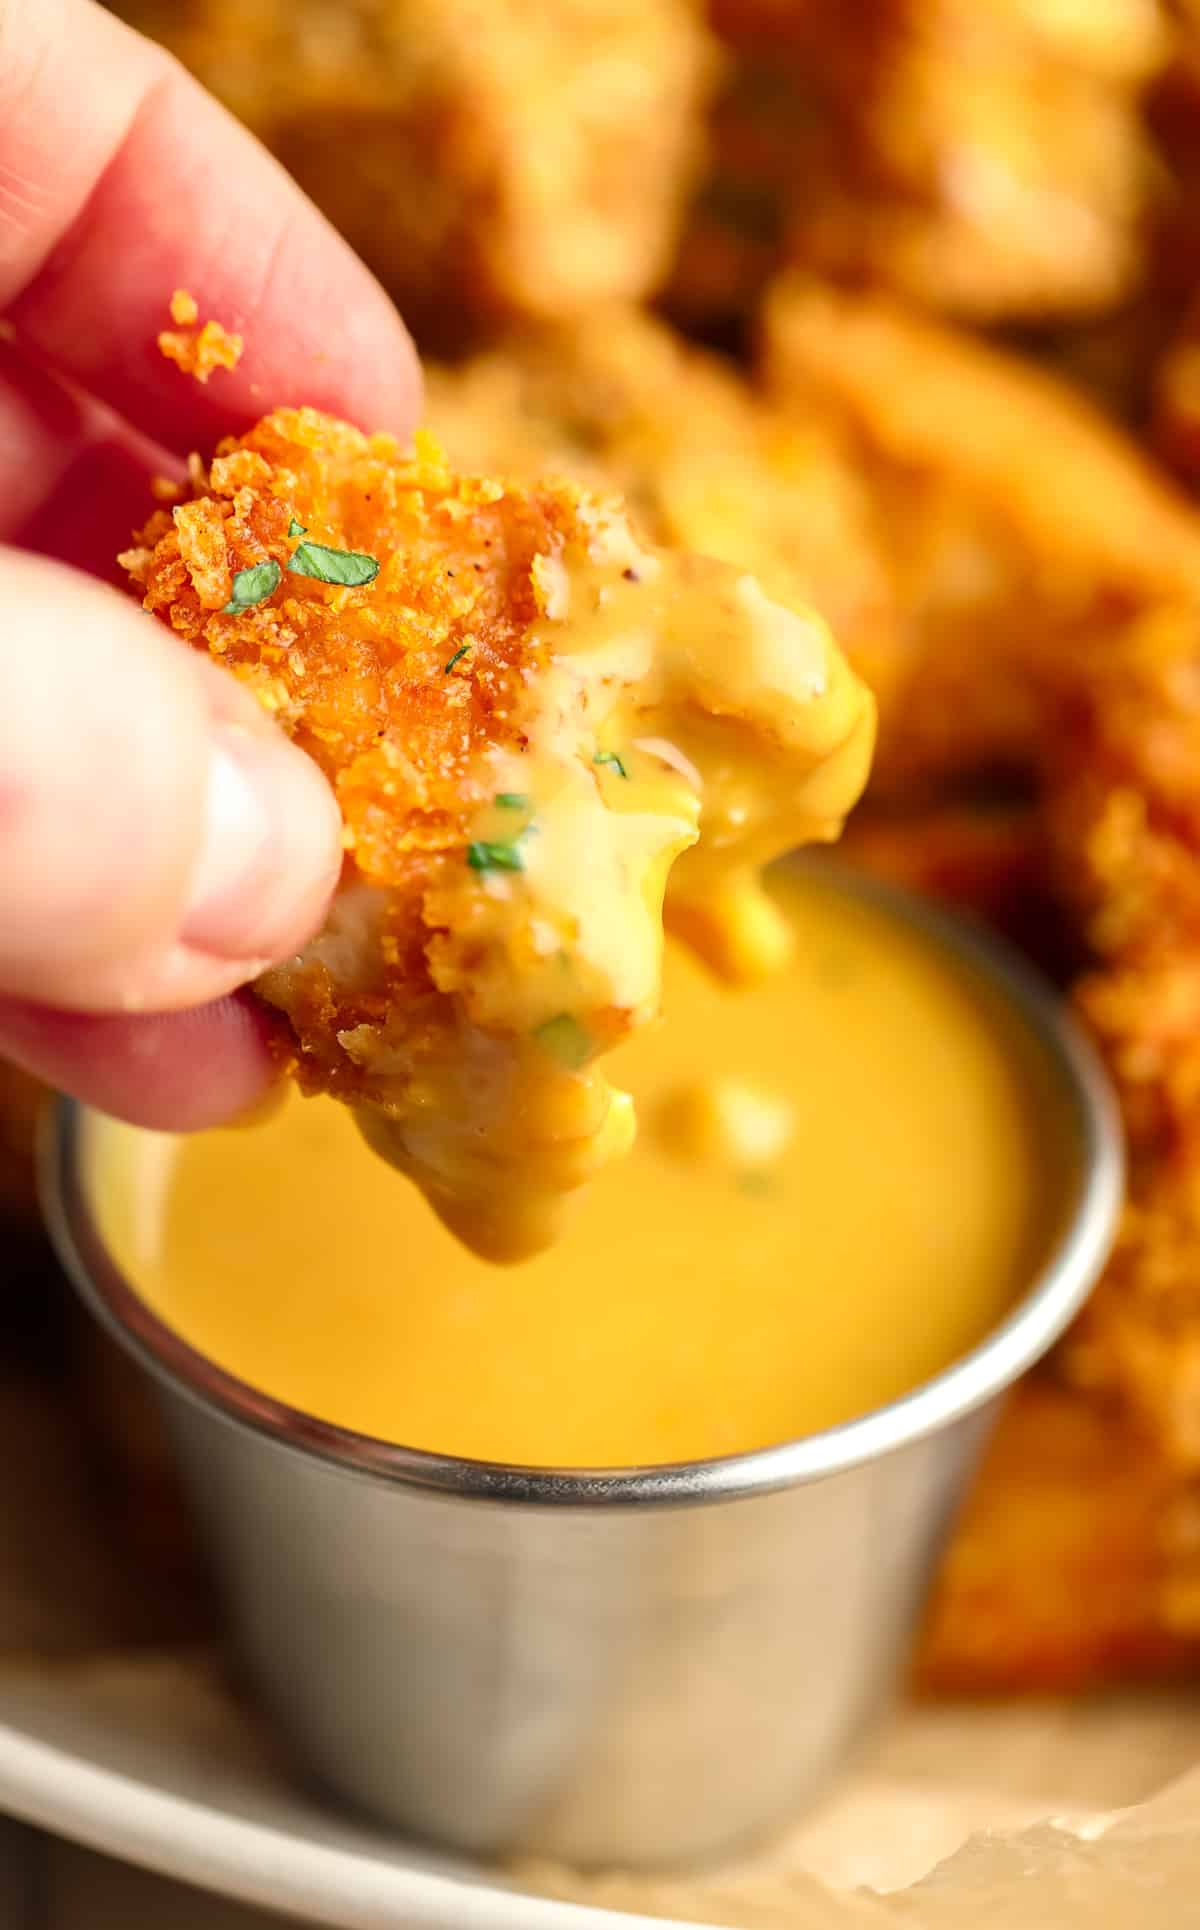 bite taken out of a vegan chicken nugget, being dipped by a hand in yellow sauce